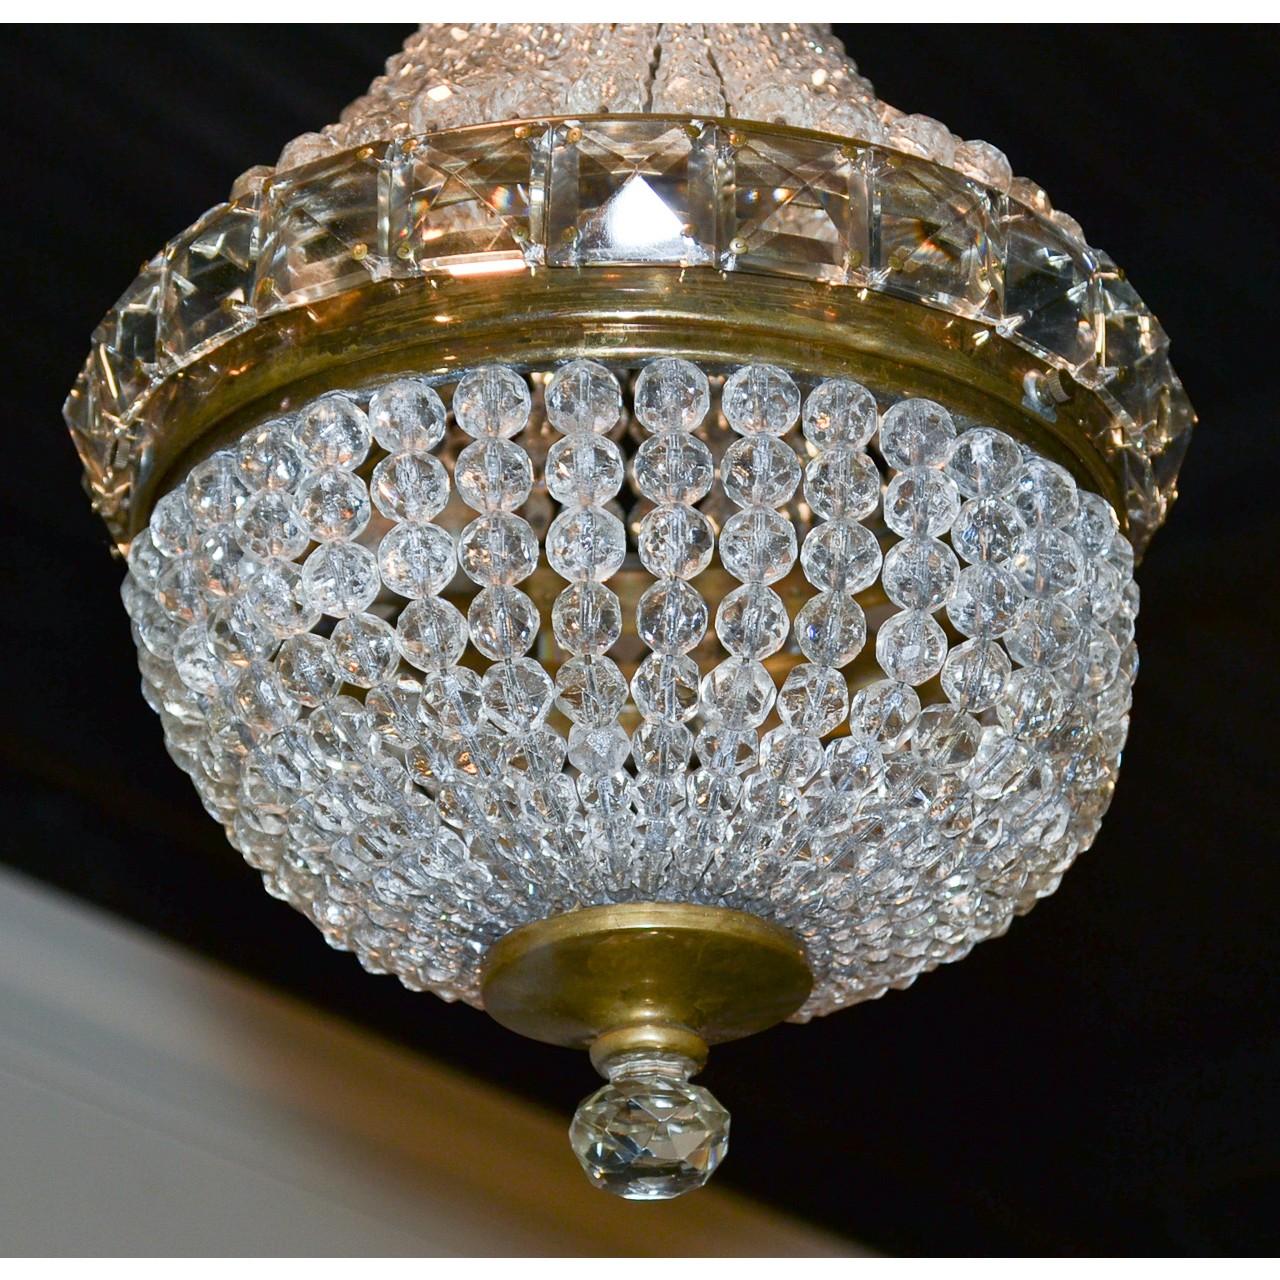 Superb small-scale French gilt bronze and crystal basket chandelier. The acanthus motif and fluted bronze canopy above a crown and central band inset with pyramidal-shaped cut crystal prisms. Embellished perfectly with multiple strands of cascading